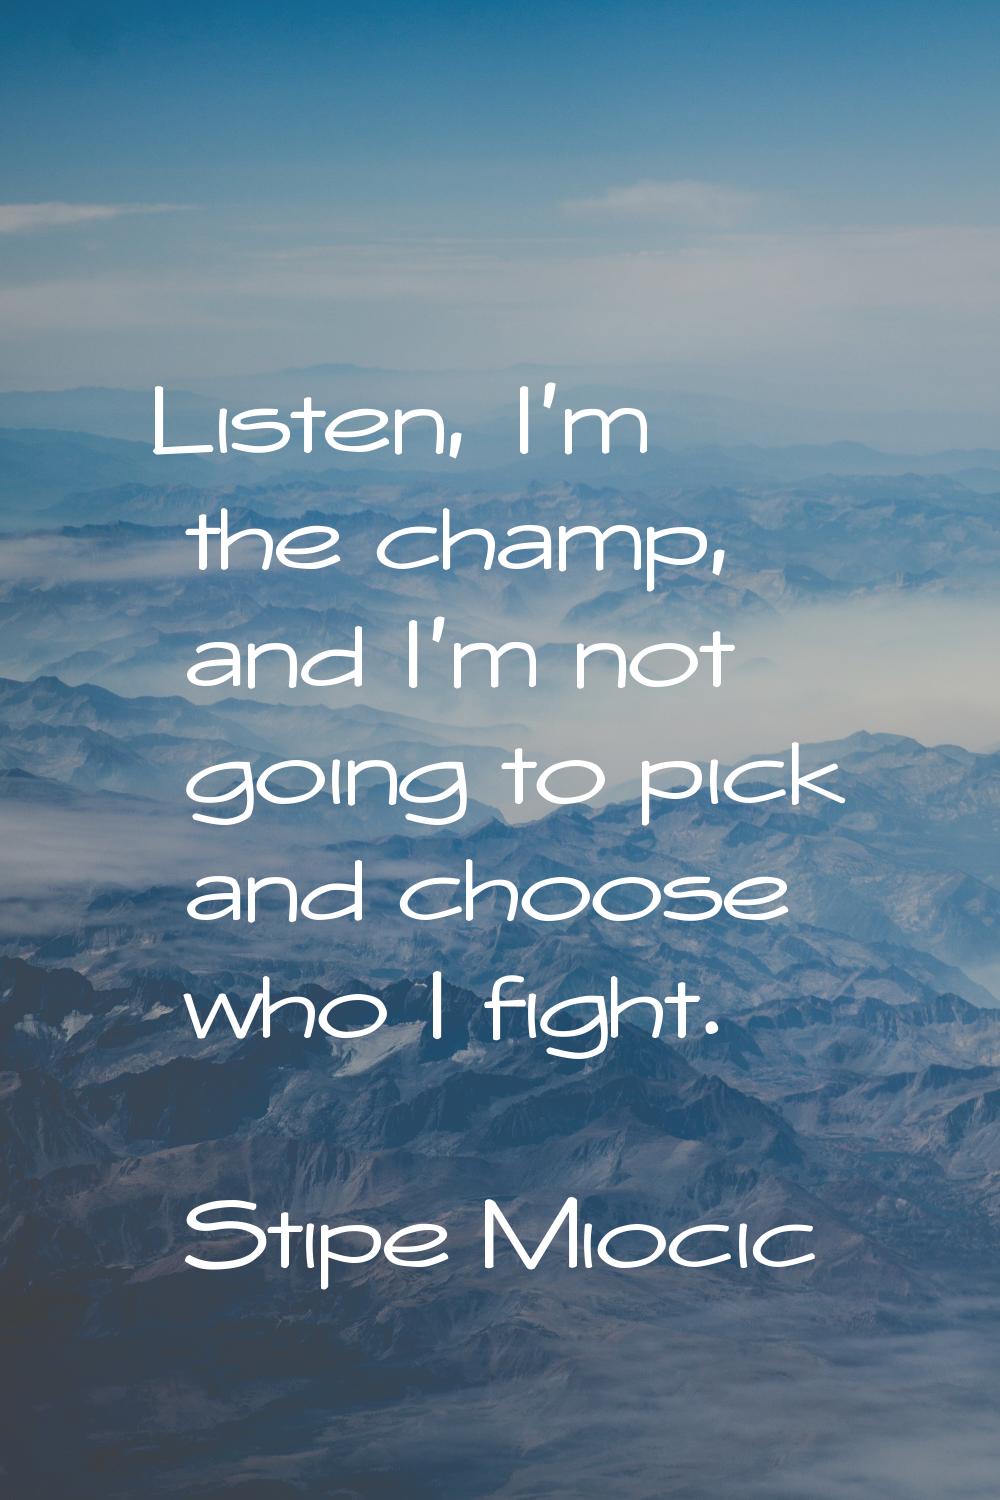 Listen, I'm the champ, and I'm not going to pick and choose who I fight.